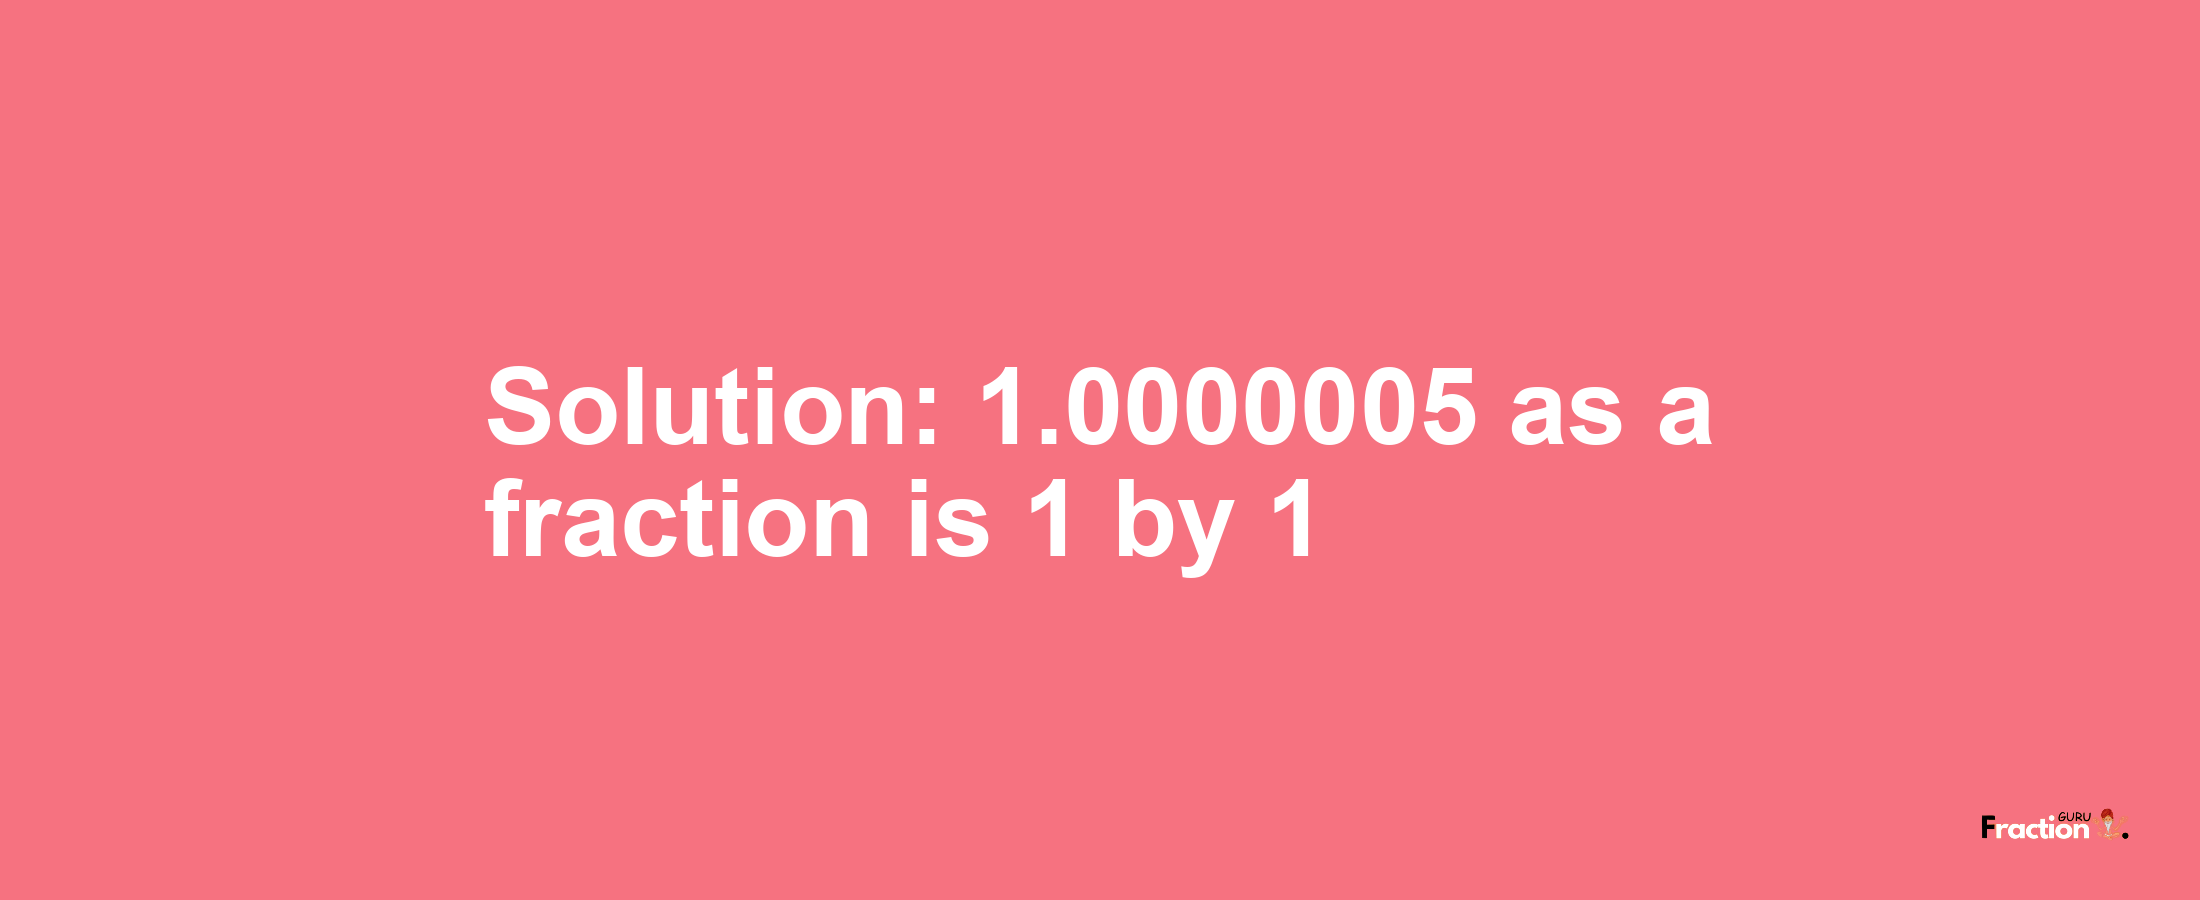 Solution:1.0000005 as a fraction is 1/1